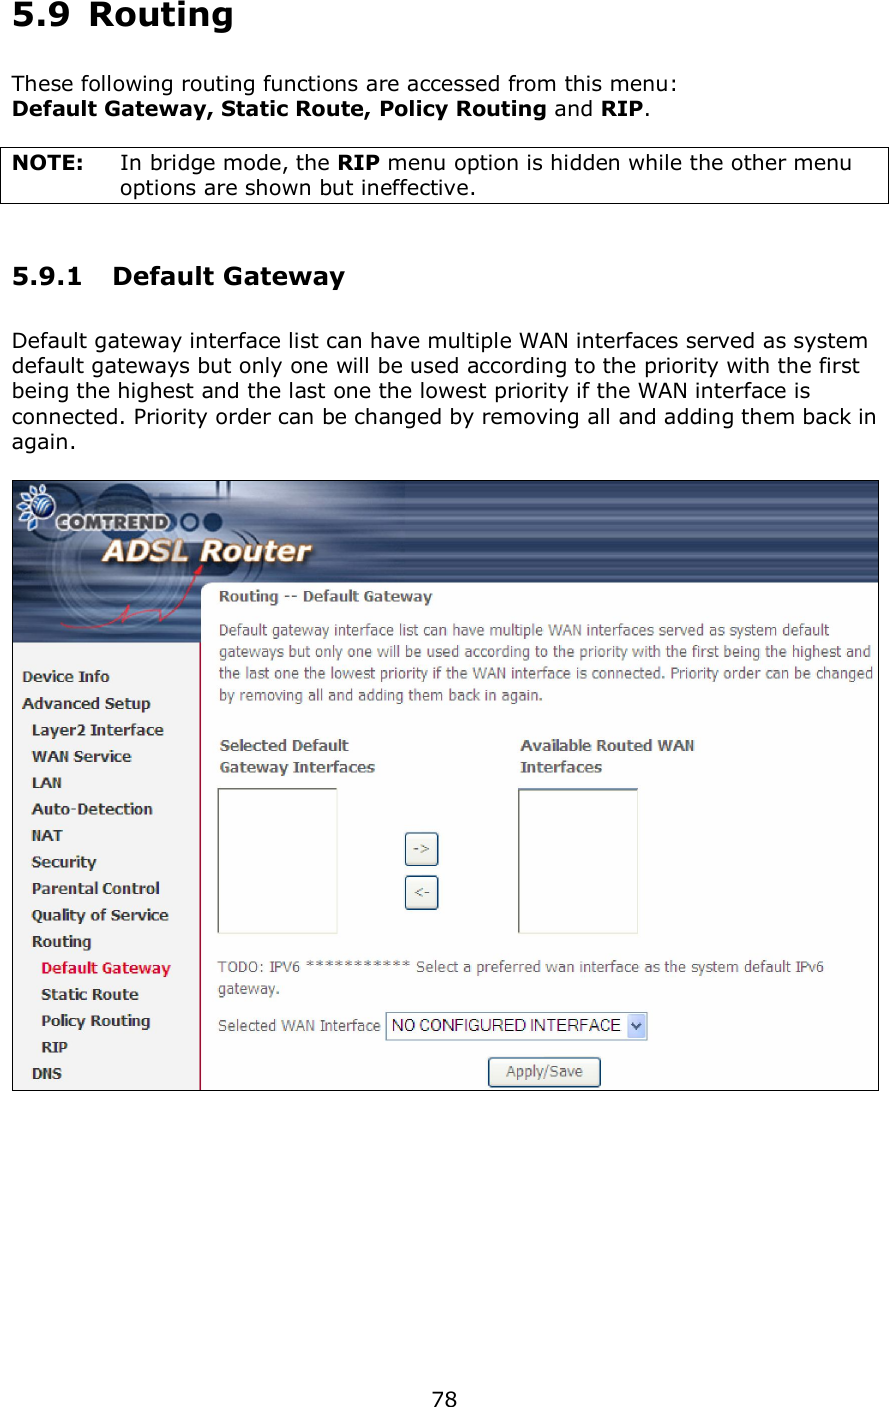  78  5.9  Routing       These following routing functions are accessed from this menu: Default Gateway, Static Route, Policy Routing and RIP.  NOTE:   In bridge mode, the RIP menu option is hidden while the other menu options are shown but ineffective. 5.9.1  Default Gateway Default gateway interface list can have multiple WAN interfaces served as system default gateways but only one will be used according to the priority with the first being the highest and the last one the lowest priority if the WAN interface is connected. Priority order can be changed by removing all and adding them back in again.     